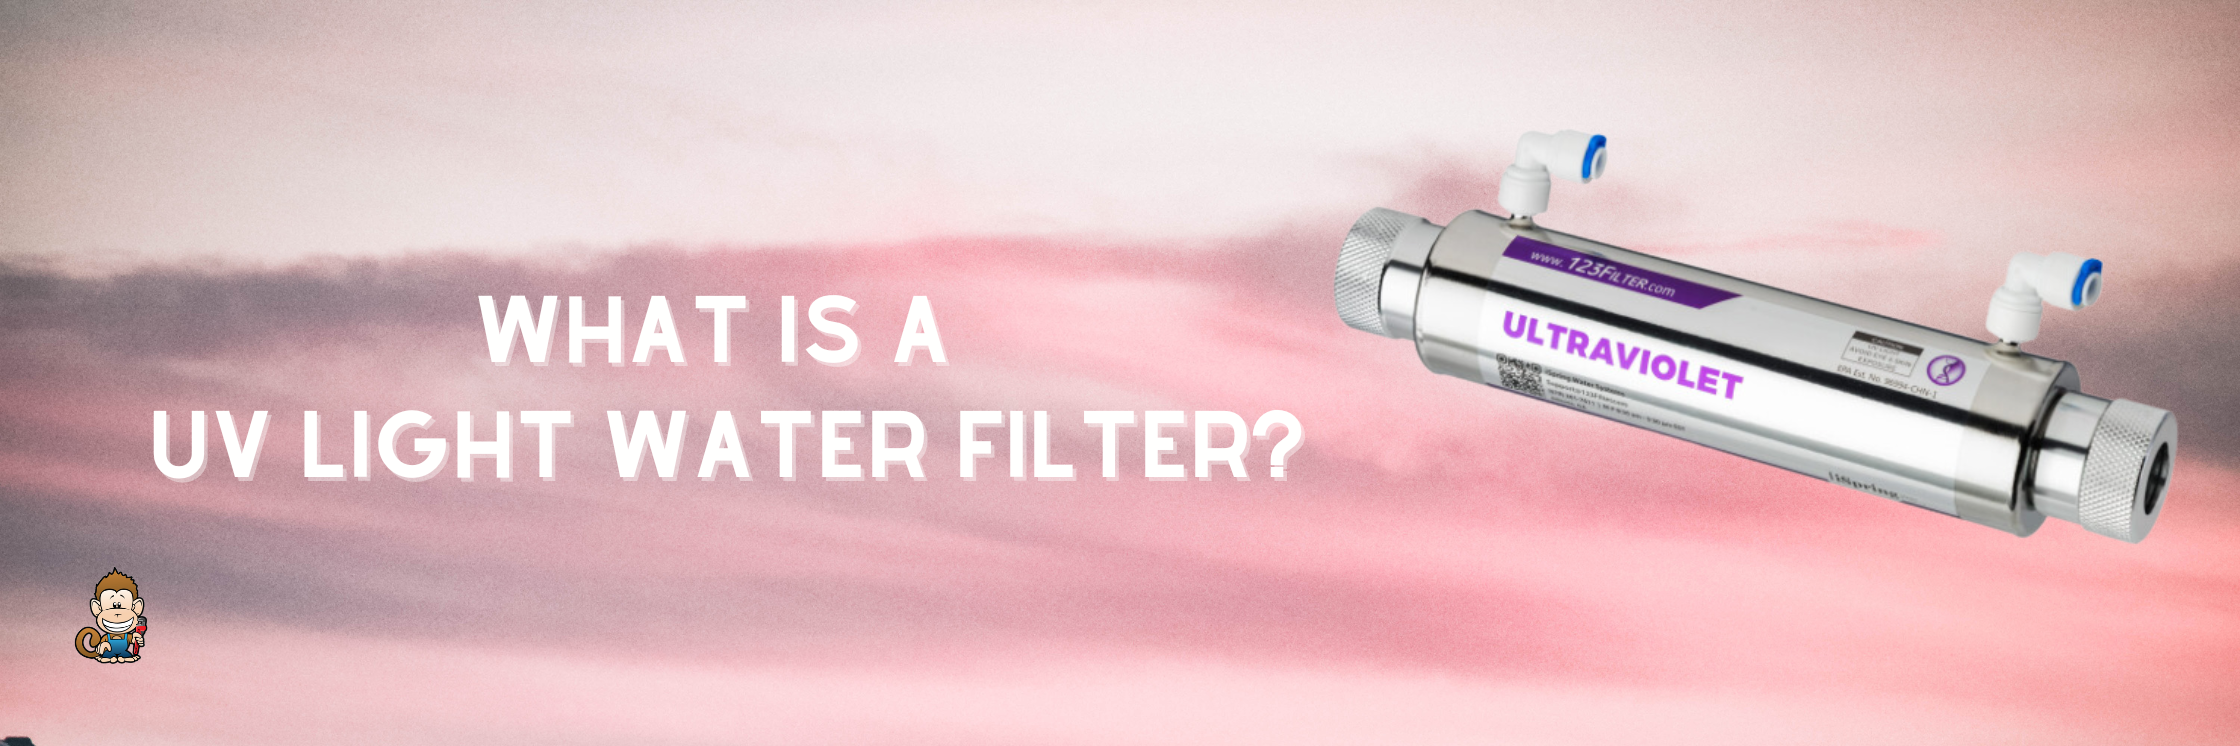 What Is a UV Light Water Filter?